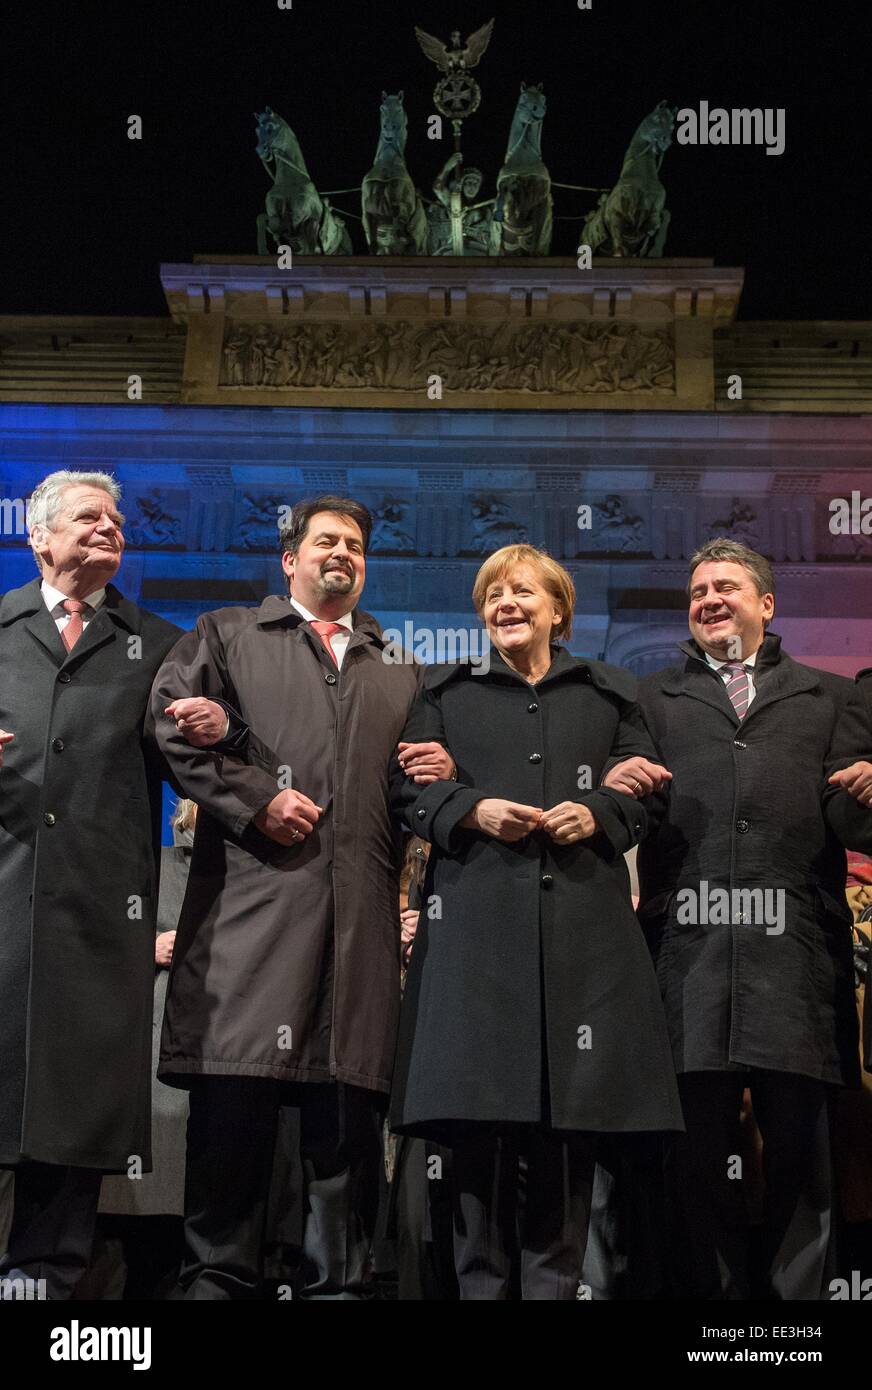 Berlin, Germany. 13th Jan, 2015. German President Joachim Gauck (L-R), chairman of the Central Committee of Muslims in Germany, Aiman Mazyek, Chancellor Angela Merkel, Minister of Economic Affairs Sigmar Gabirel, attend a vigil for the victims of the attacks in France at the Brandenburg Gate in Berlin, Germany, 13 January 2015. The Central Committee of Muslims and the Turkish community have invoked the slogan 'Stand together - Show face' for the rally against Islamist terror and for the peaceful co-existence of the religions. Photo: MAURIZIO GAMBARINI/dpa/Alamy Live News Stock Photo